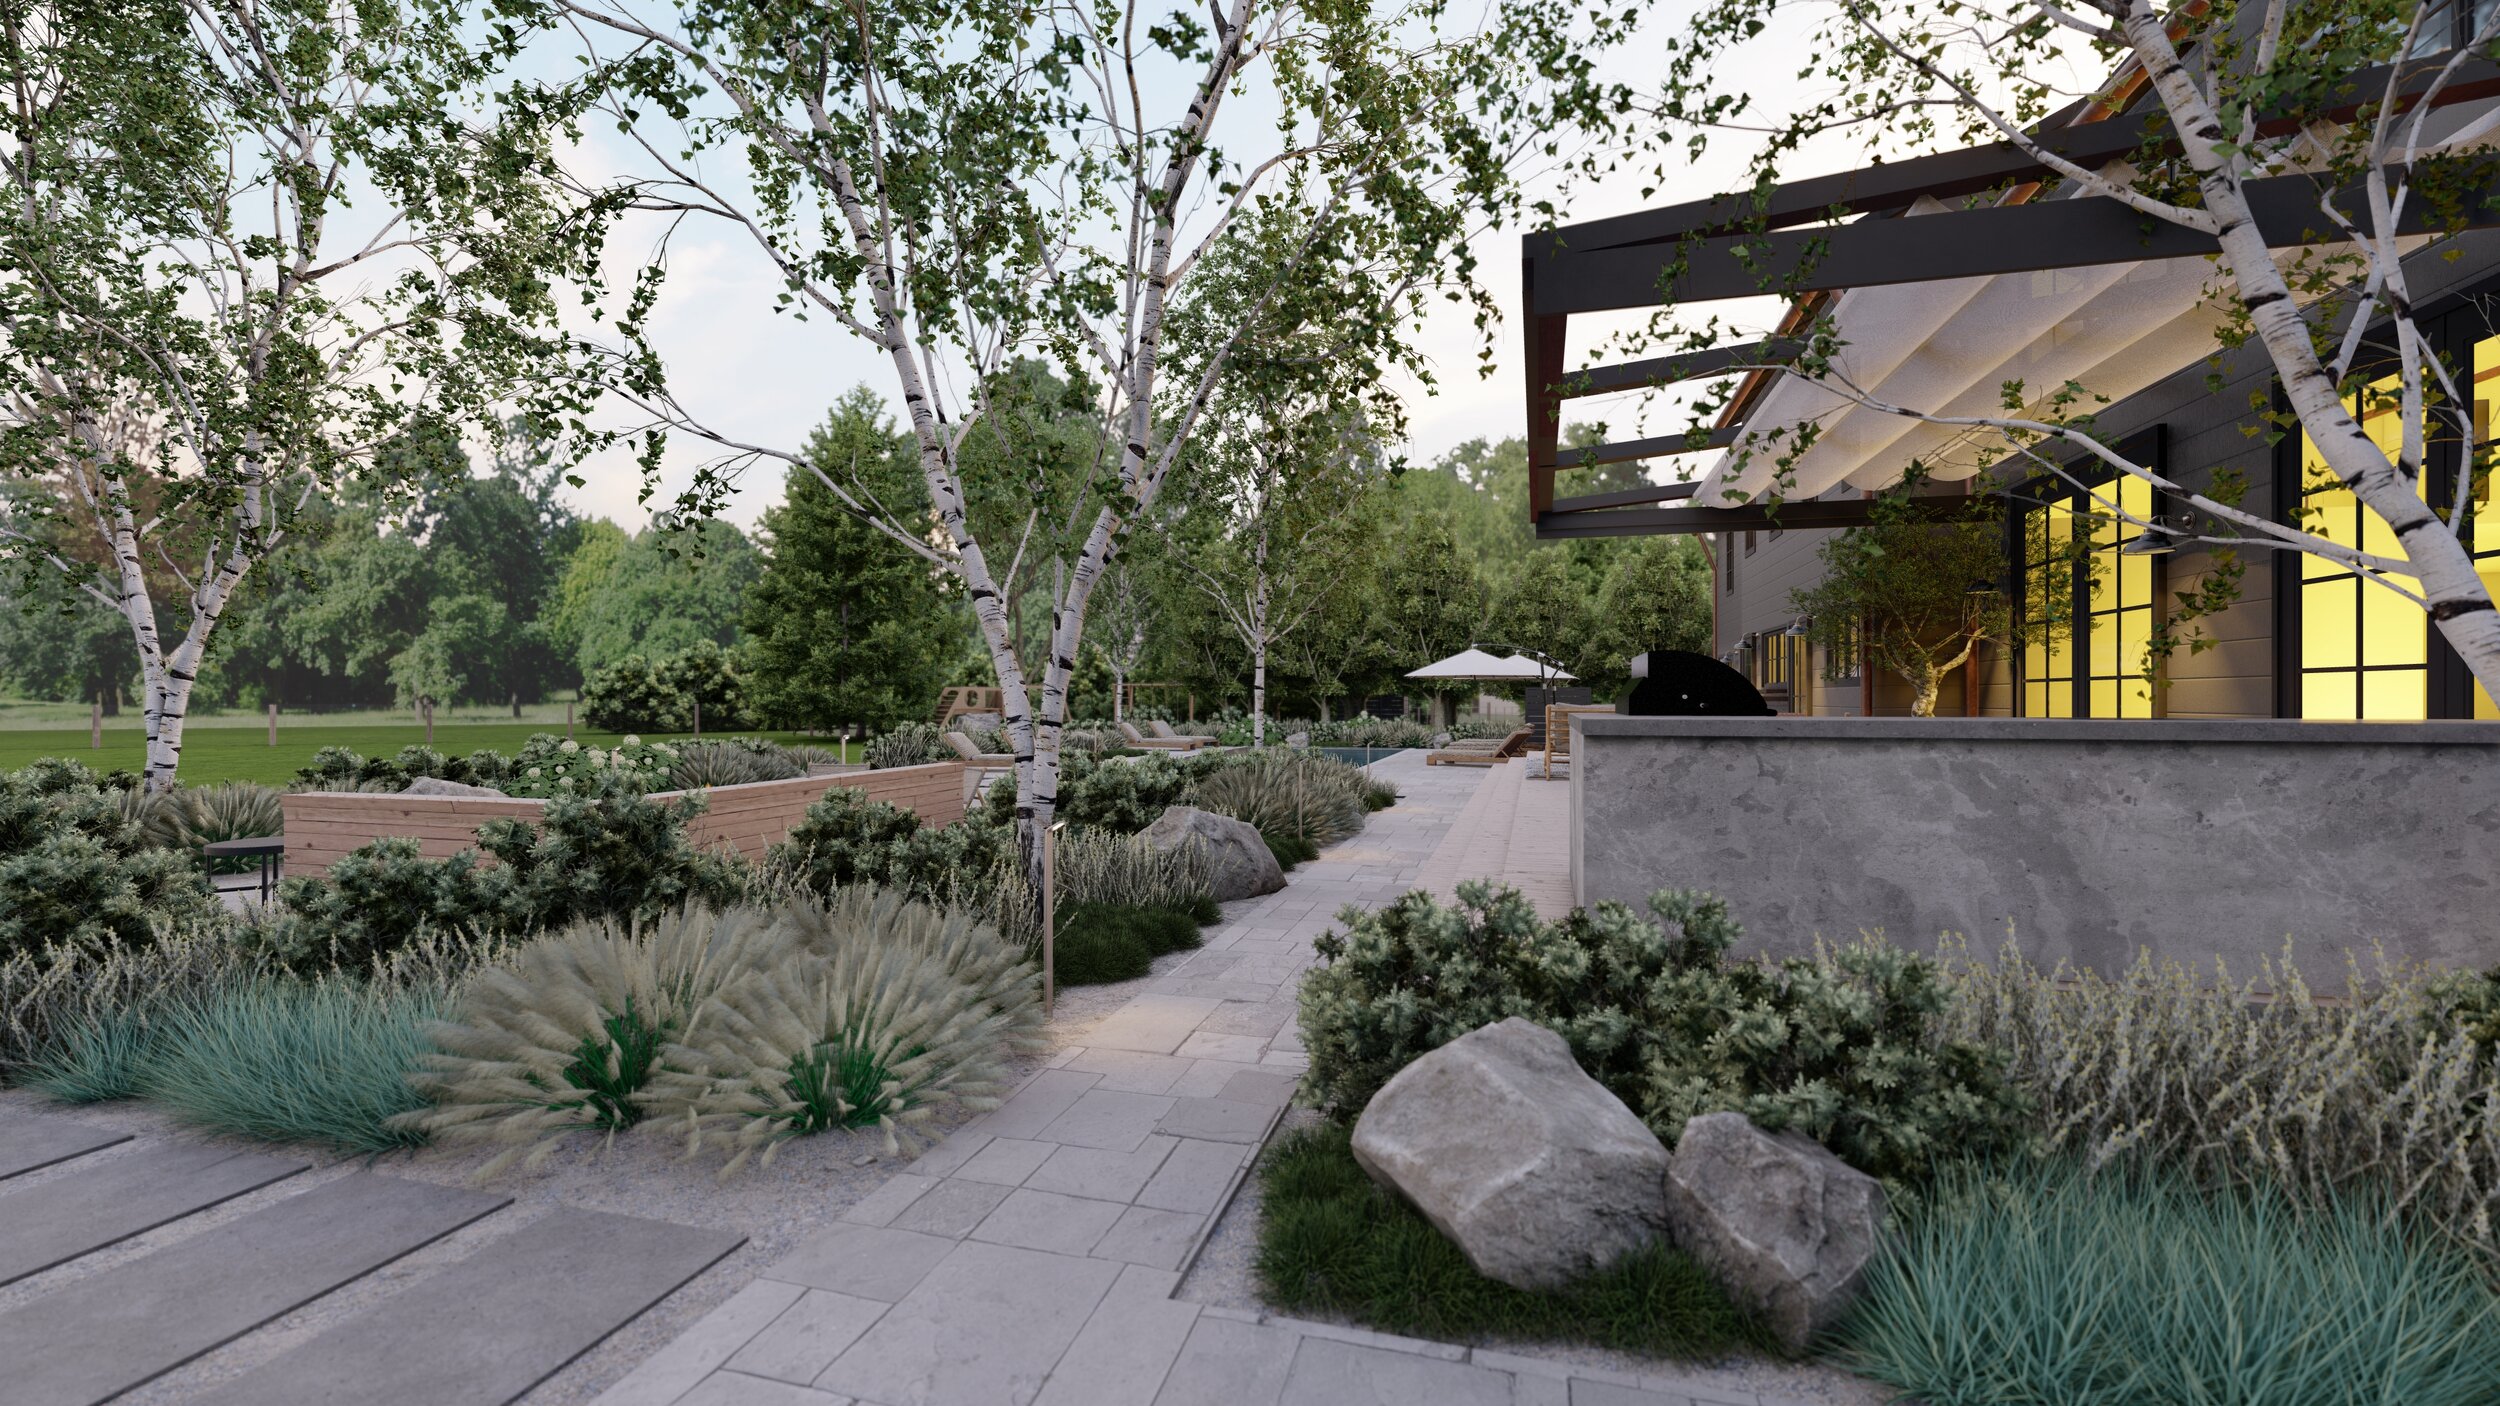 View from side yard of dark charcoal home exterior with grasses, birch trees near outdoor dining area and outdoor kitchen under pergola